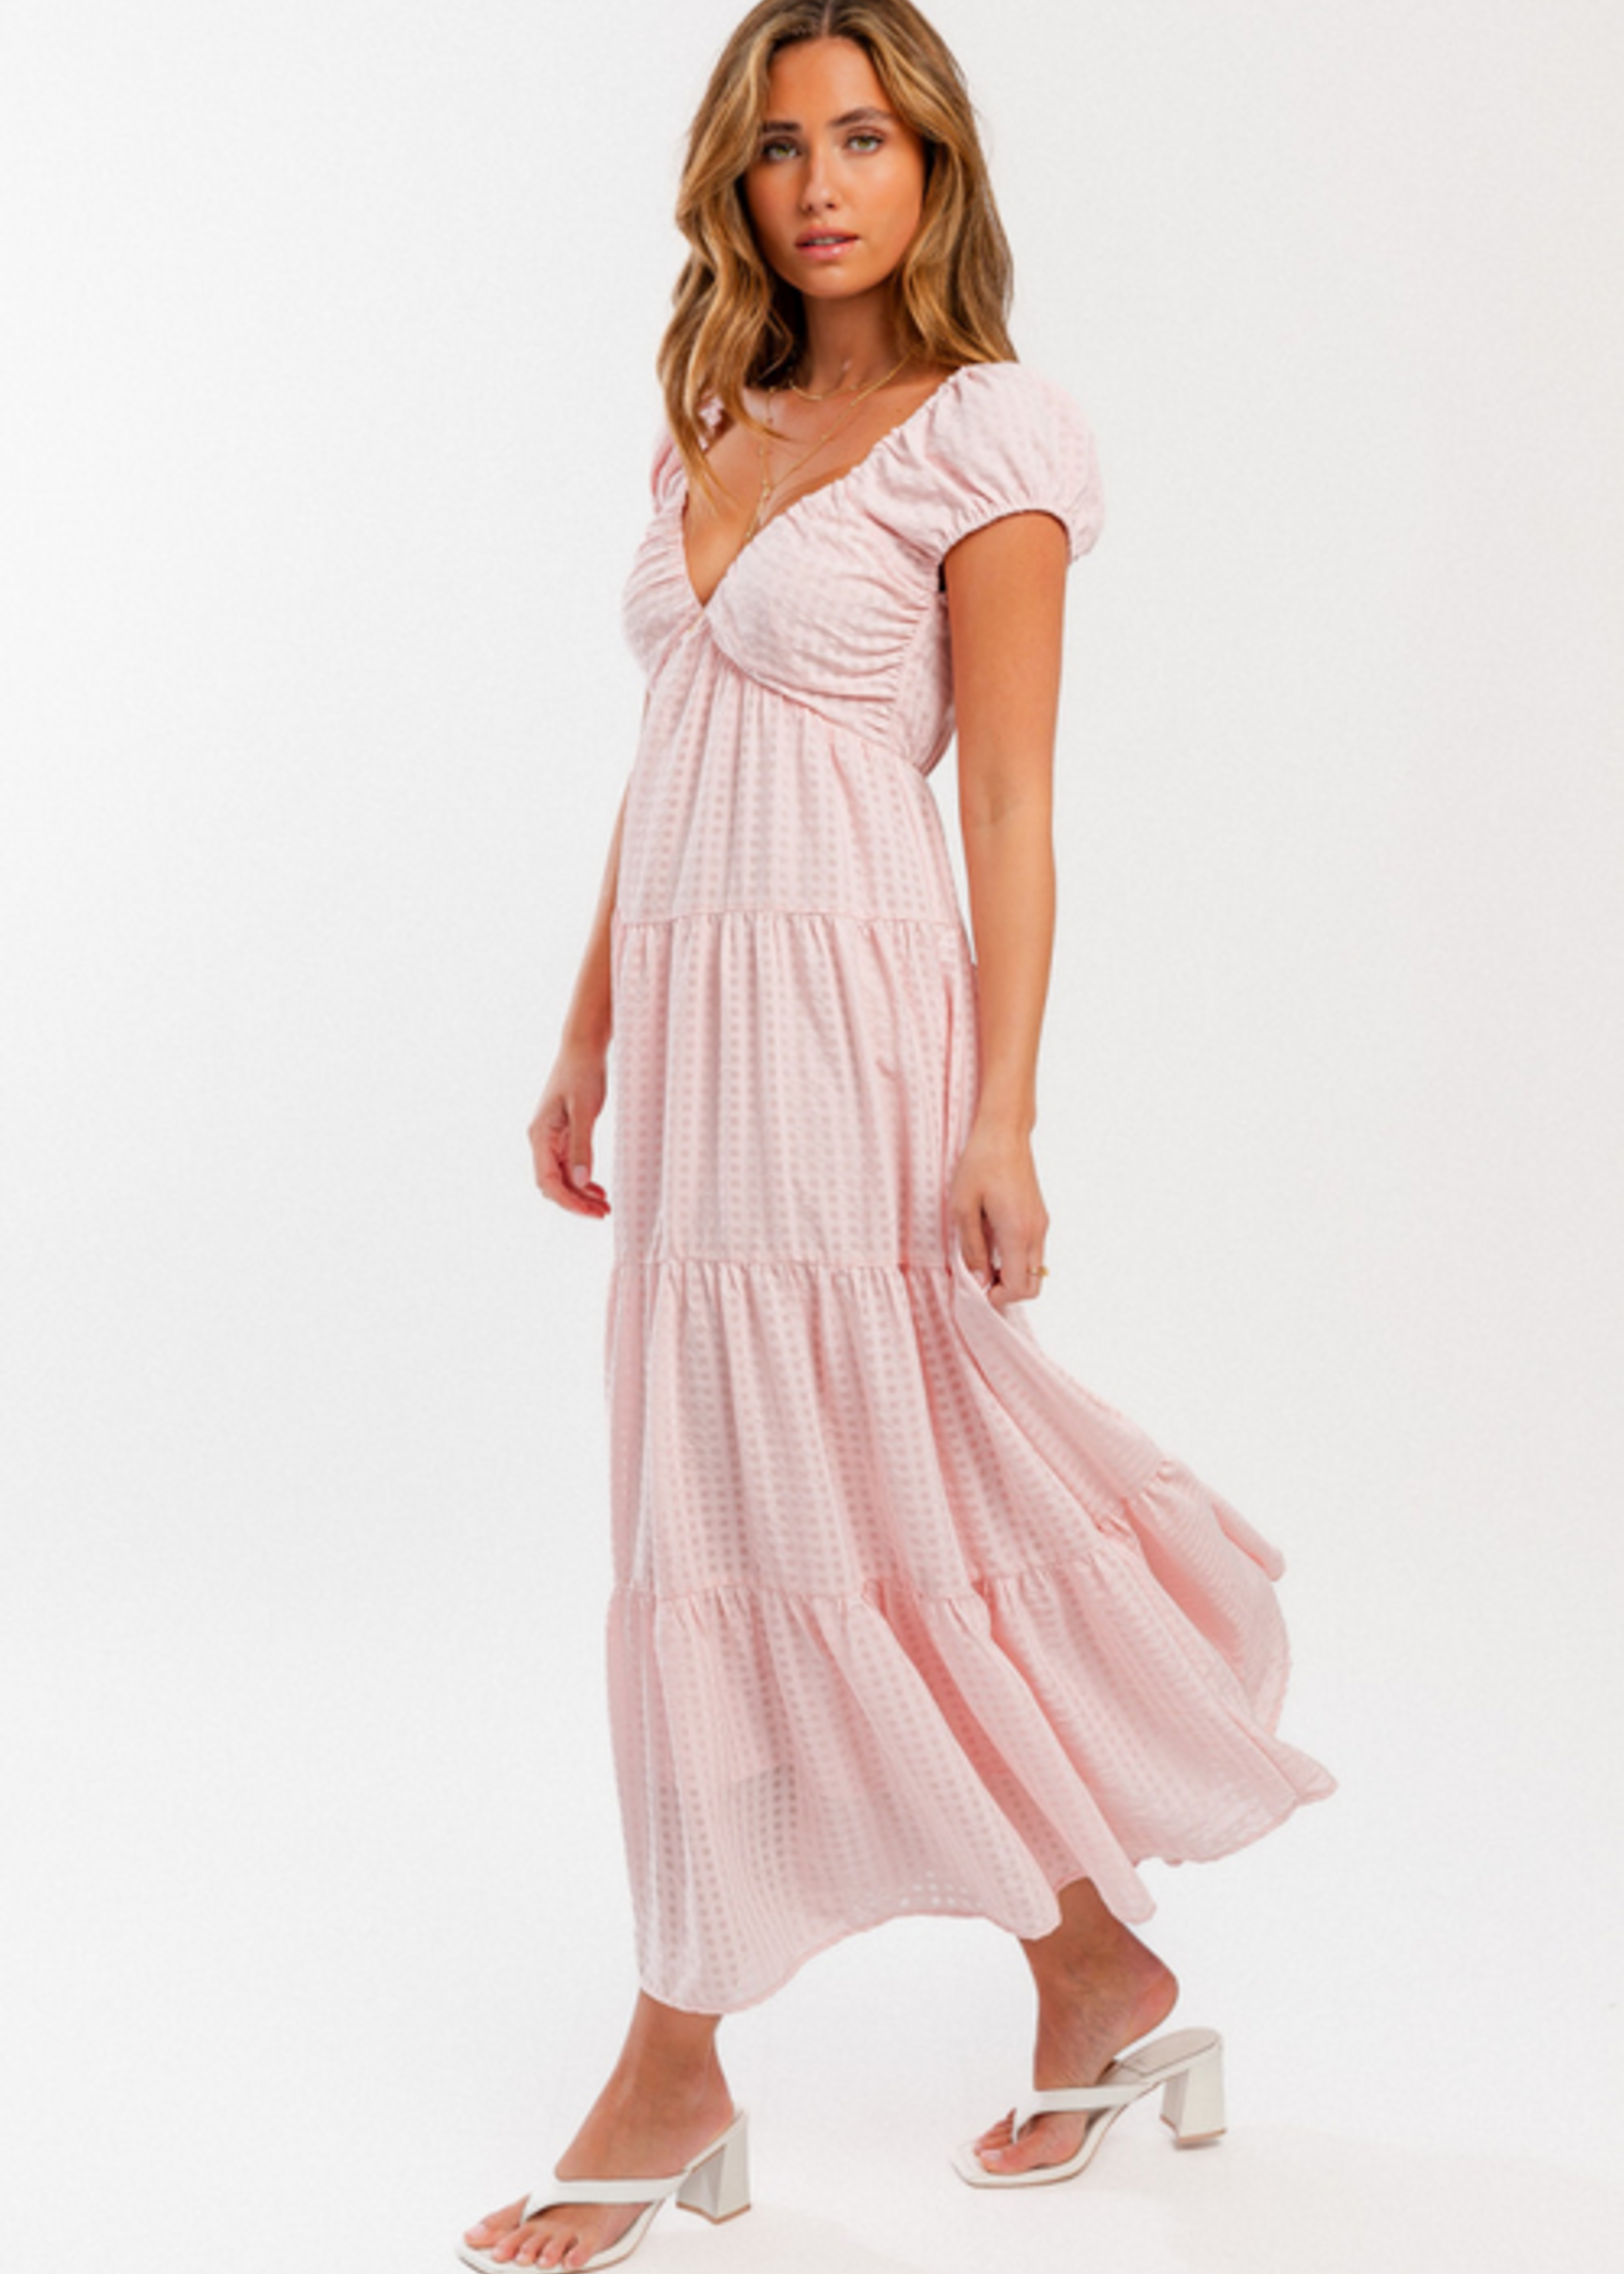 Tiered Long Pink Dress